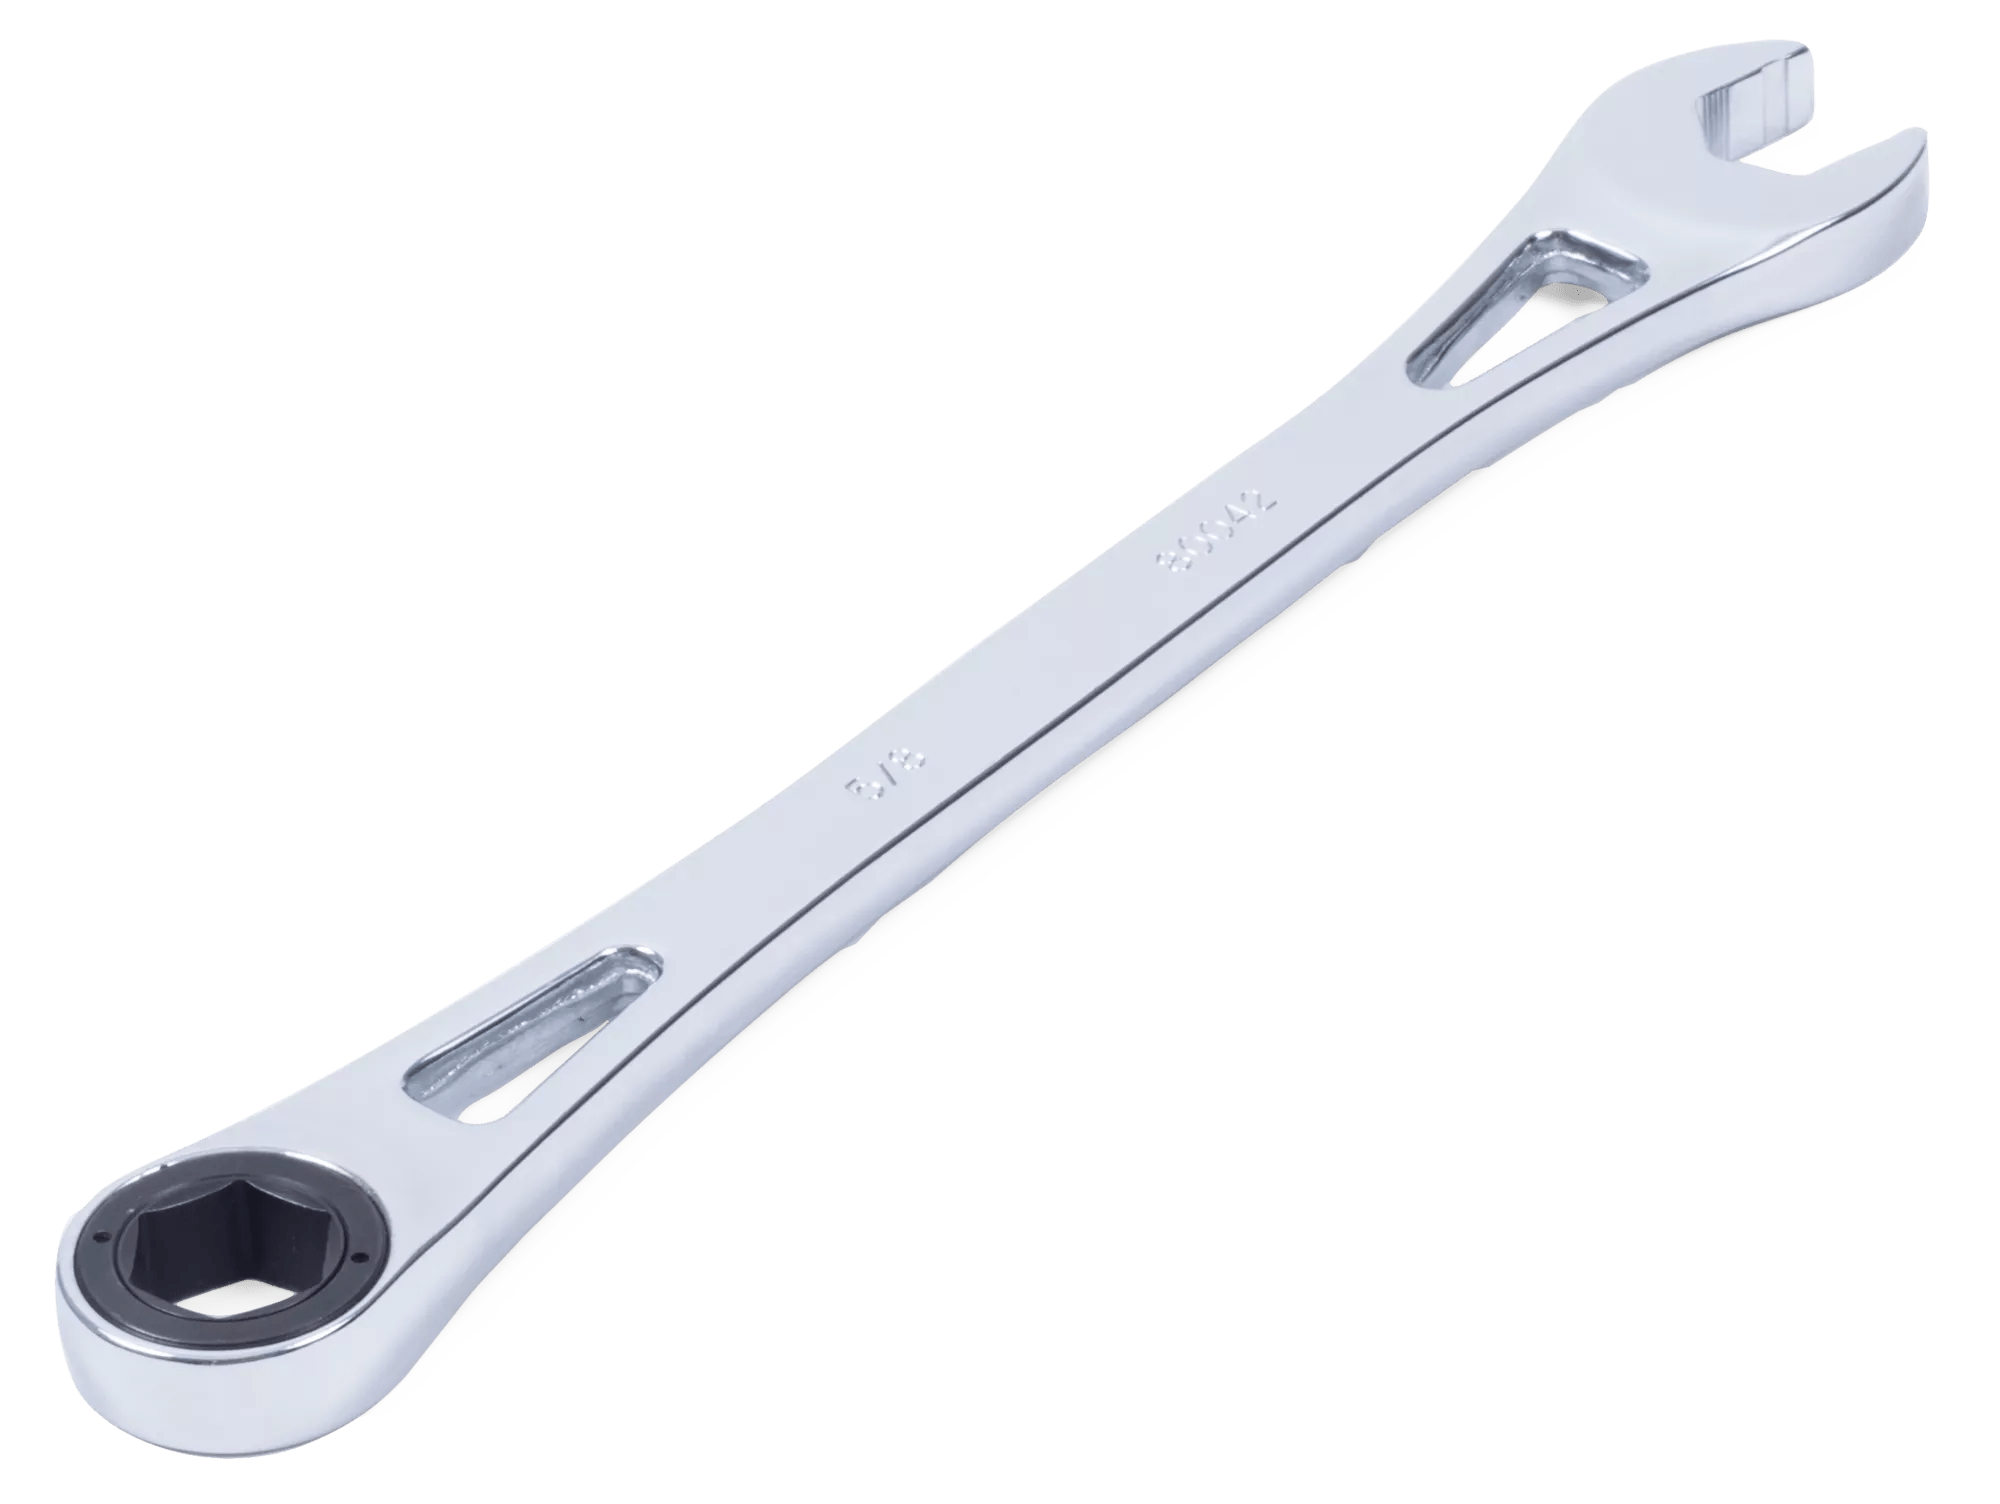 1/2" Micro Arc Ratcheting Combination Wrench